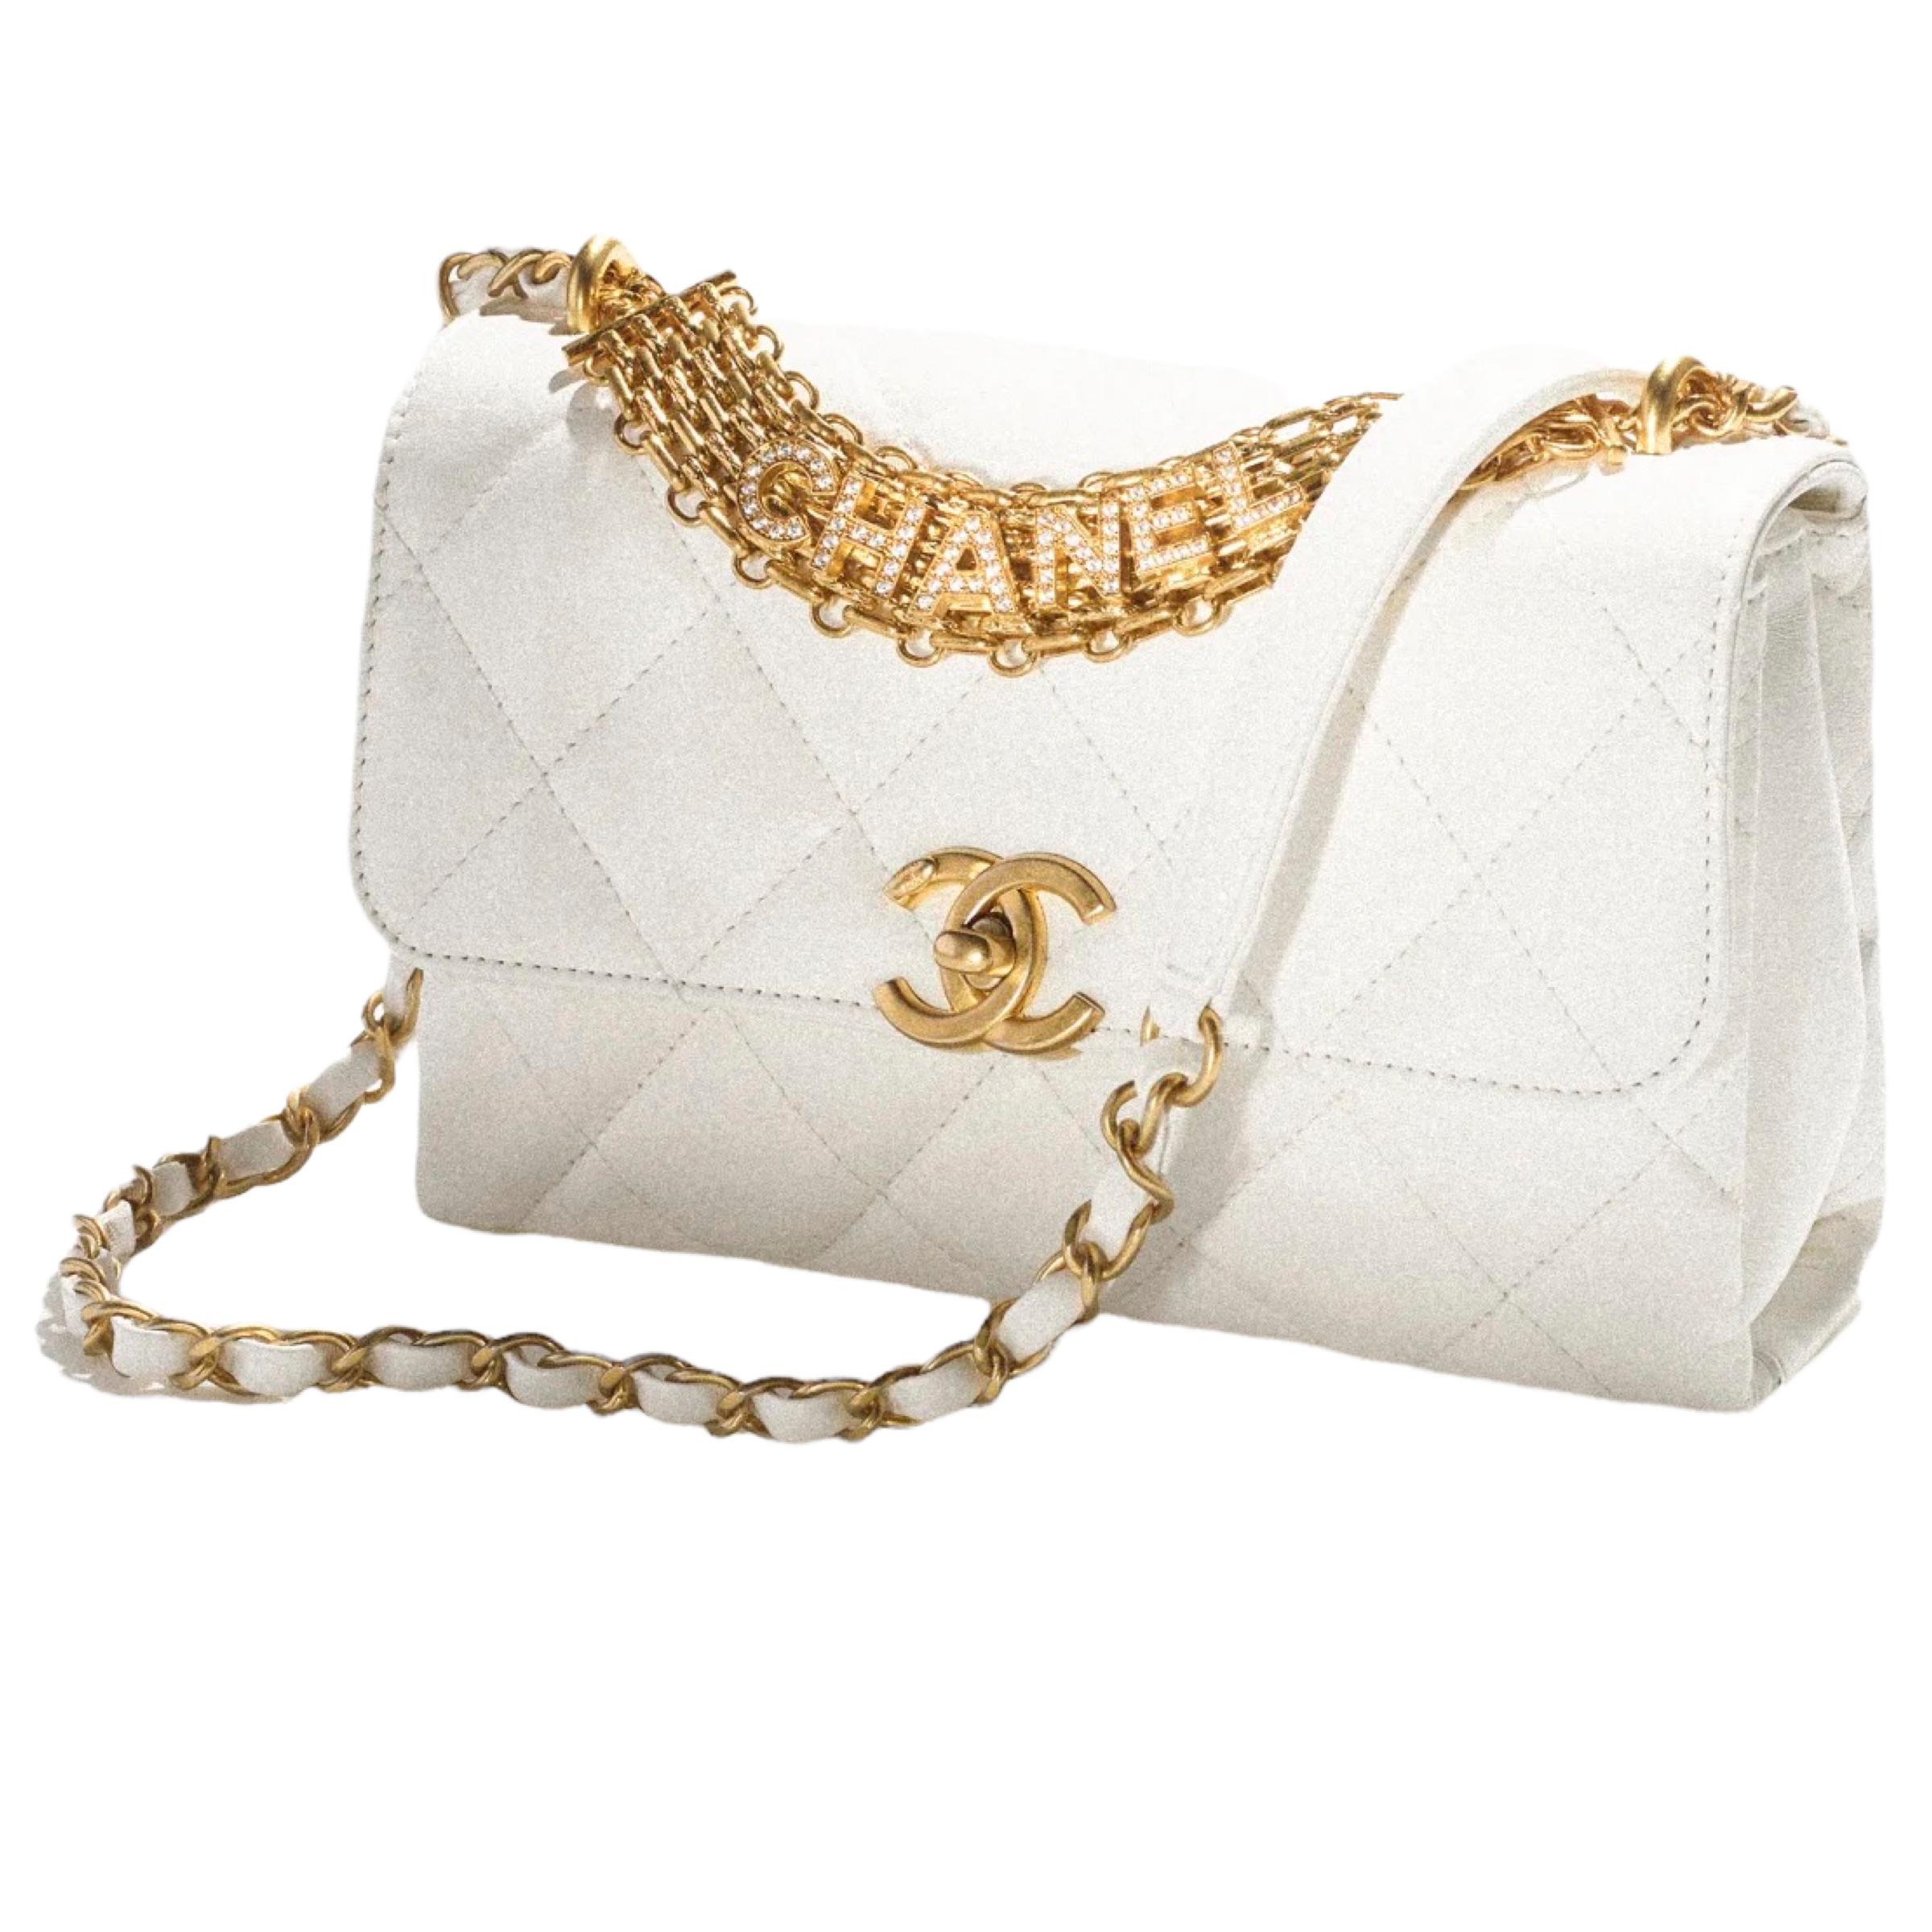 New Chanel White Small Flap Bag Quilted Leather Crossbody Bag

Authenticity Guaranteed

DETAILS
Brand: Chanel
Gender: Women
Category: Crossbody bag
Condition: Brand new
Color: White
Material: Leather
Quilted leather
Gold CC logo
Gold-tone